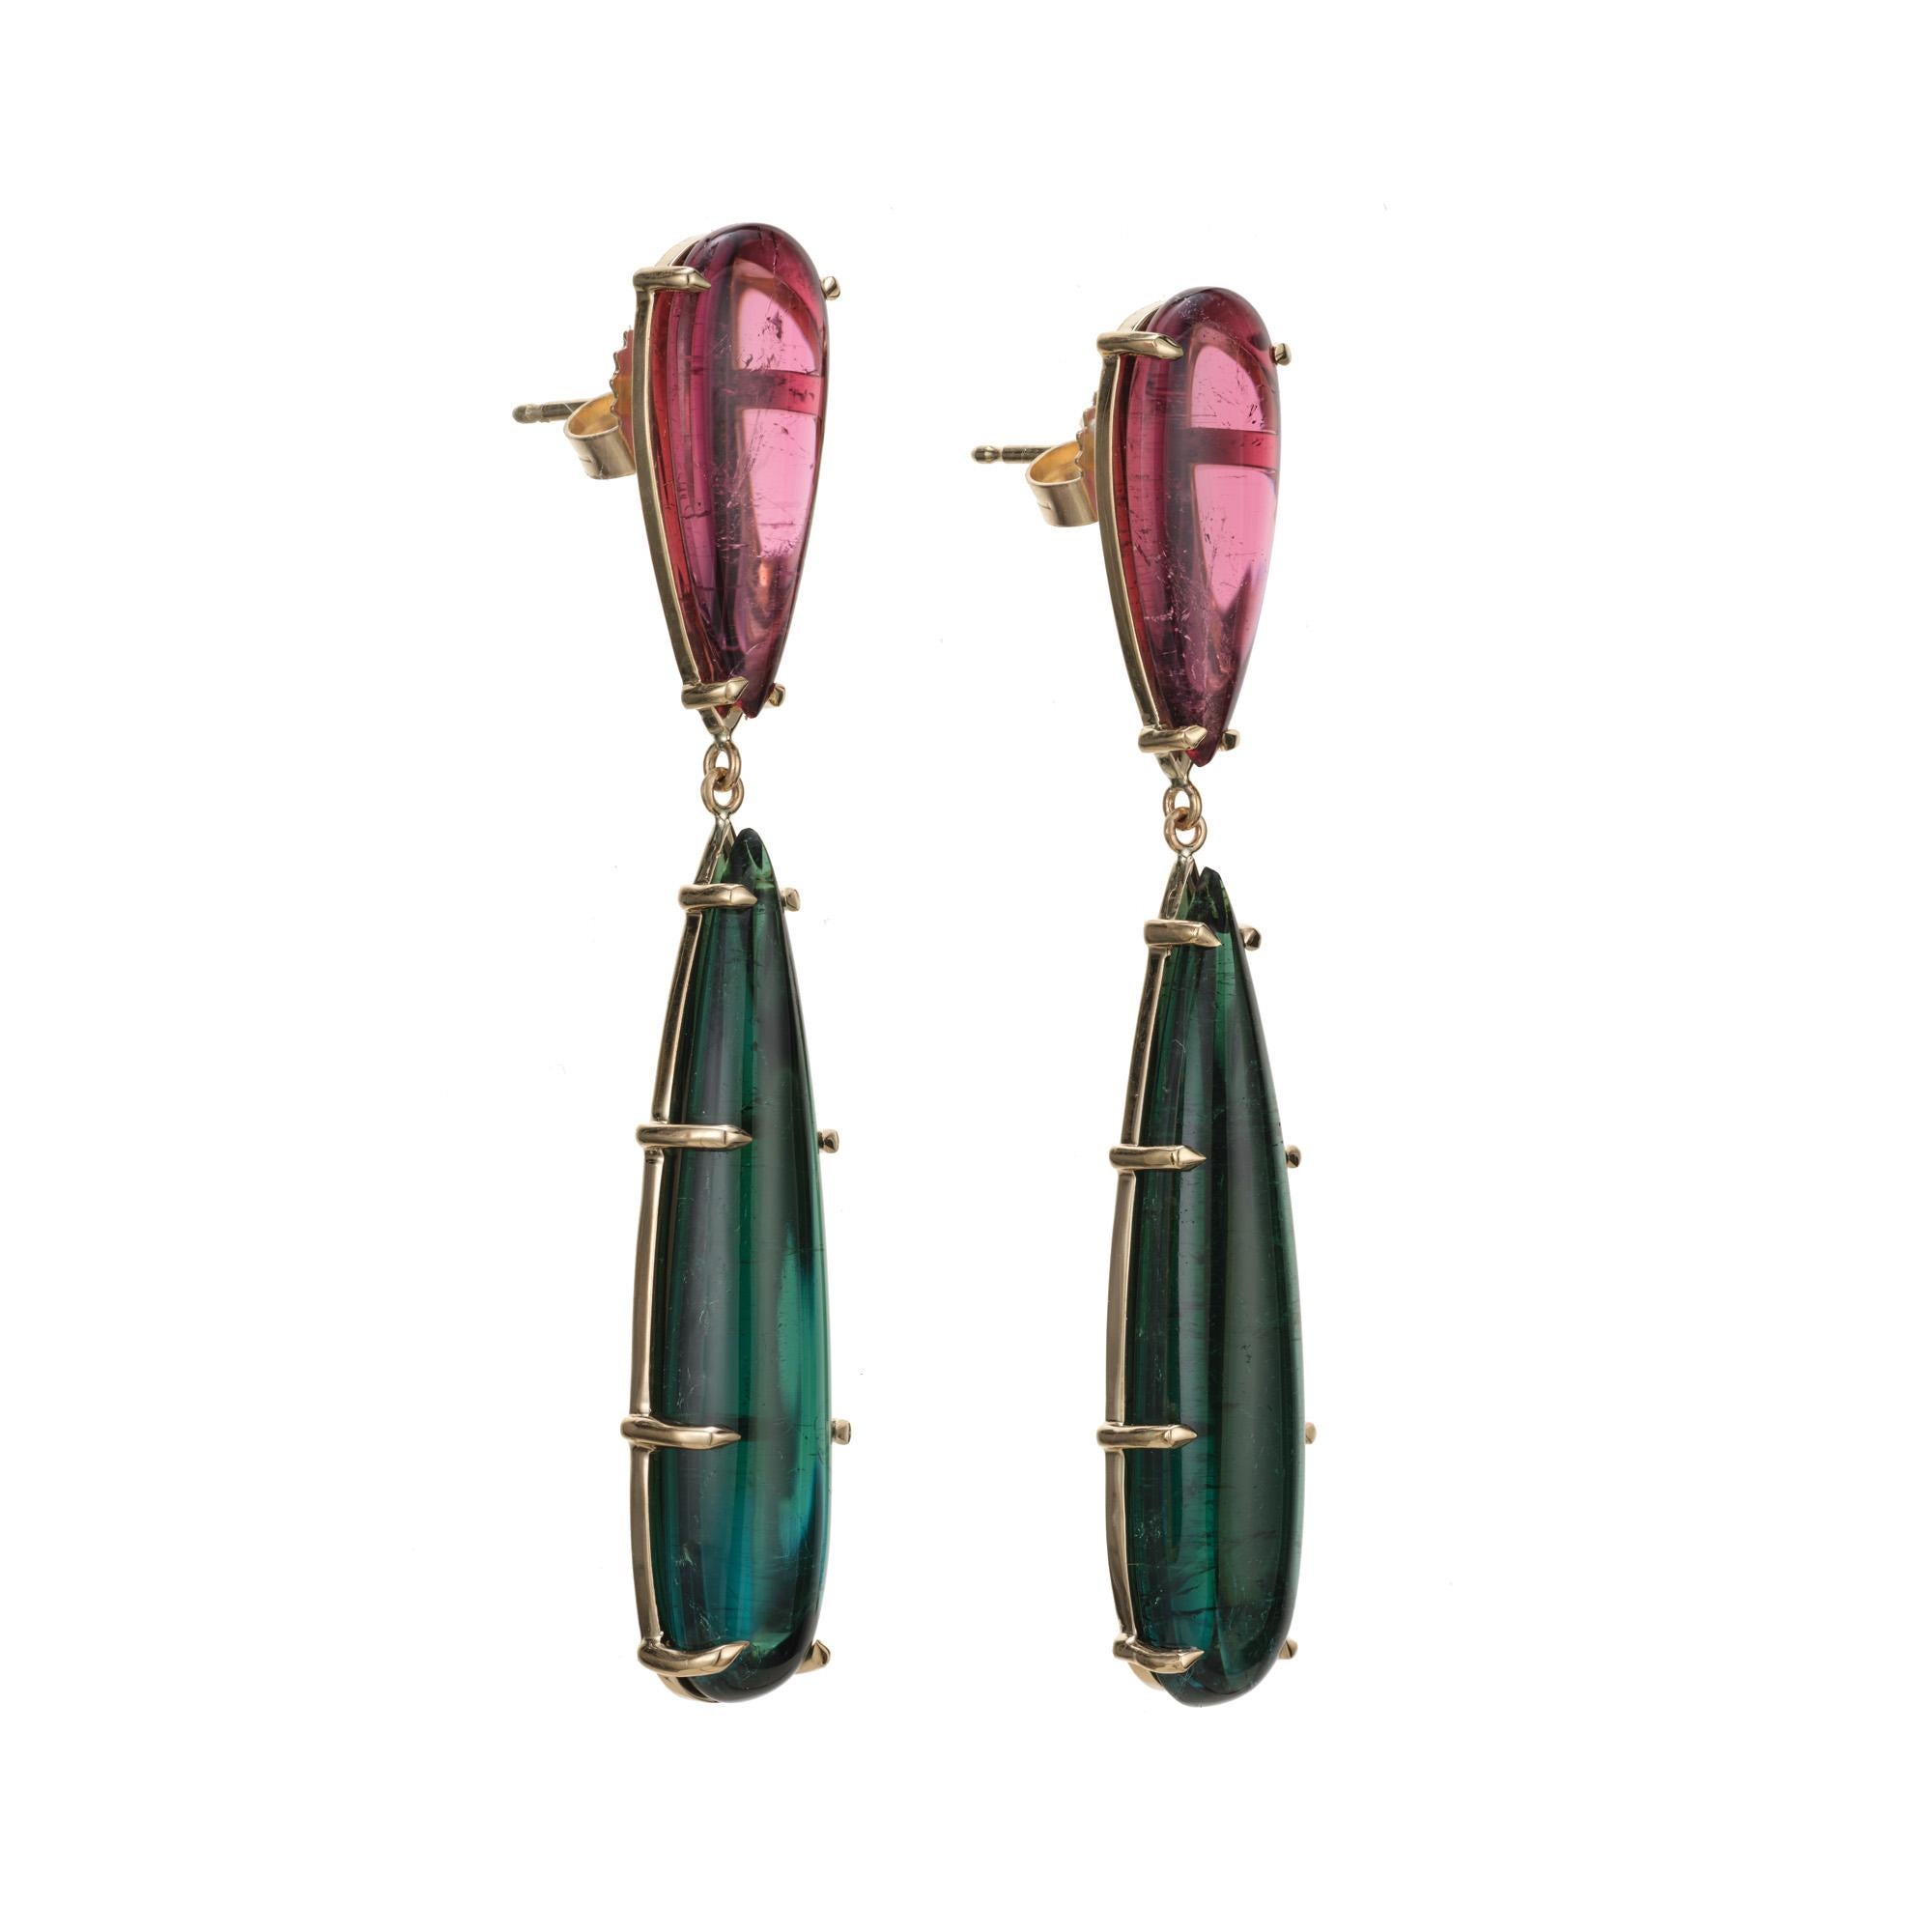 Untreated natural color pink and green tourmaline dangle earrings. 2 natural pink pear shaped tourmalines totaling 7.15cts each with a green blue pear shaped tourmaline dangle totaling 18.31cts.  Designed and crafted in the Peter Suchy workshop.

2